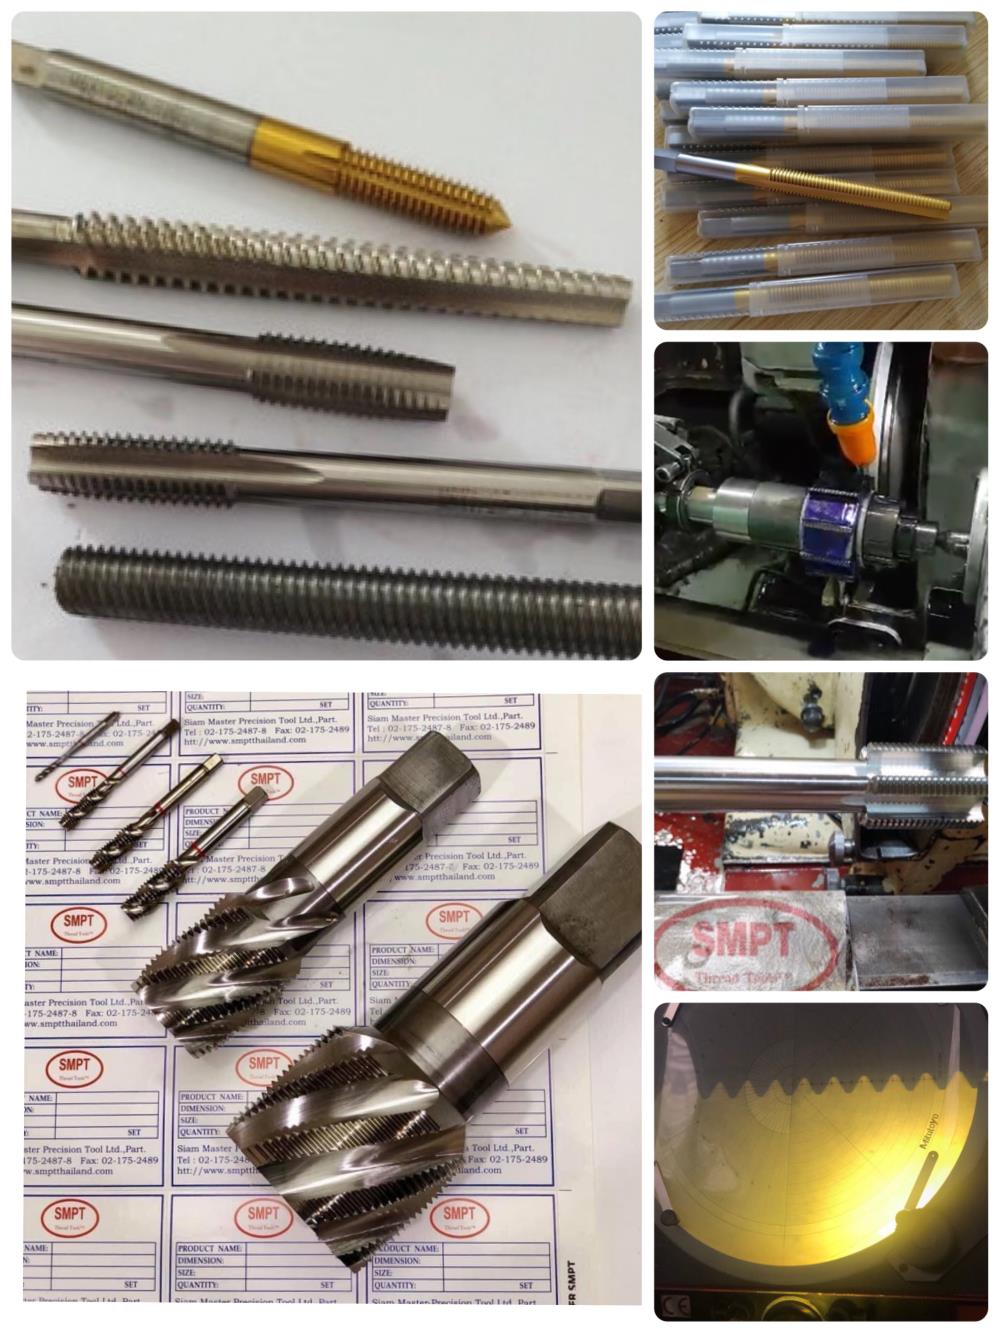 Customized screw taps: made to order